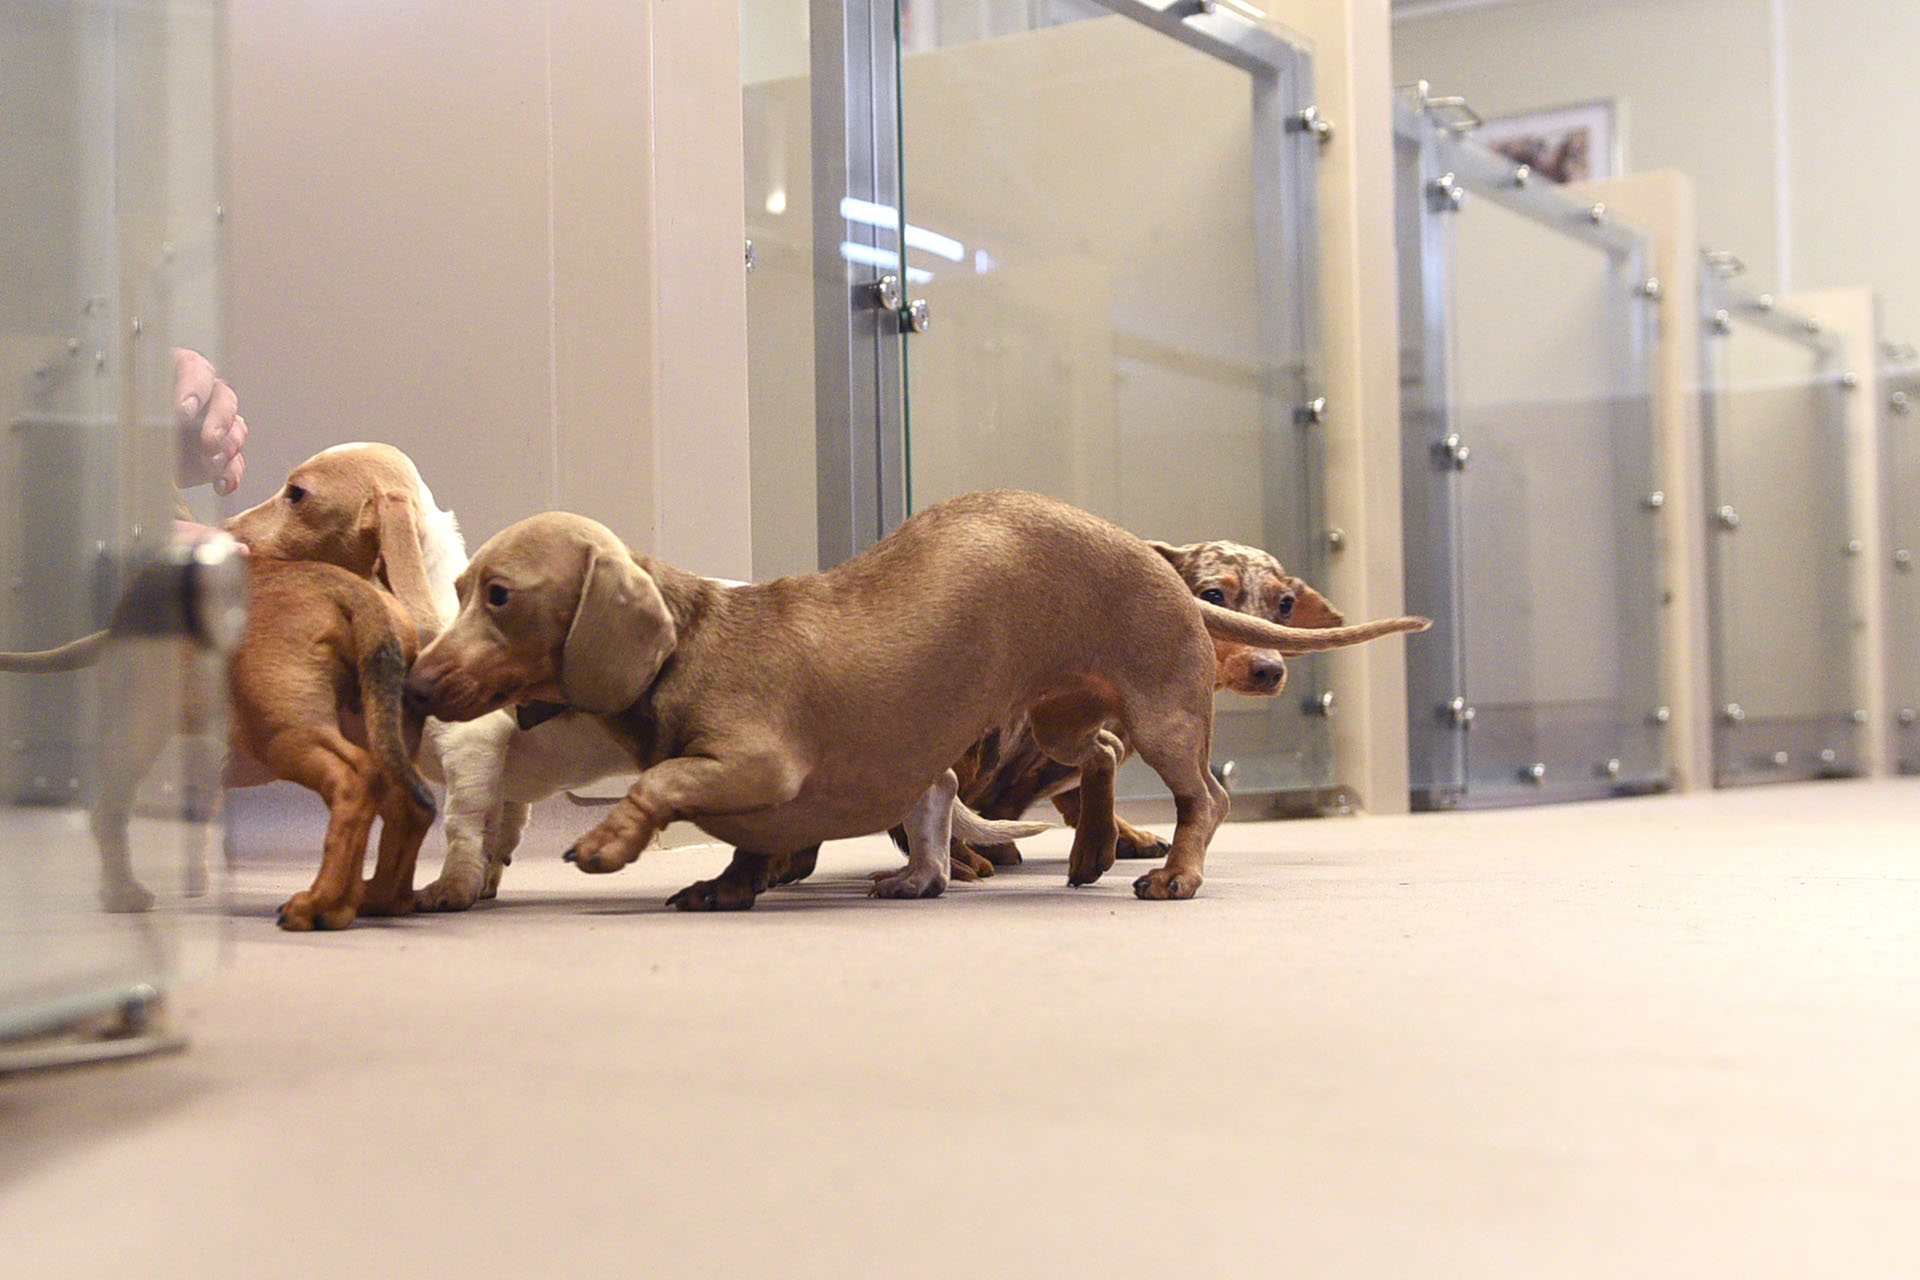 Dogs playing on Altro flooring